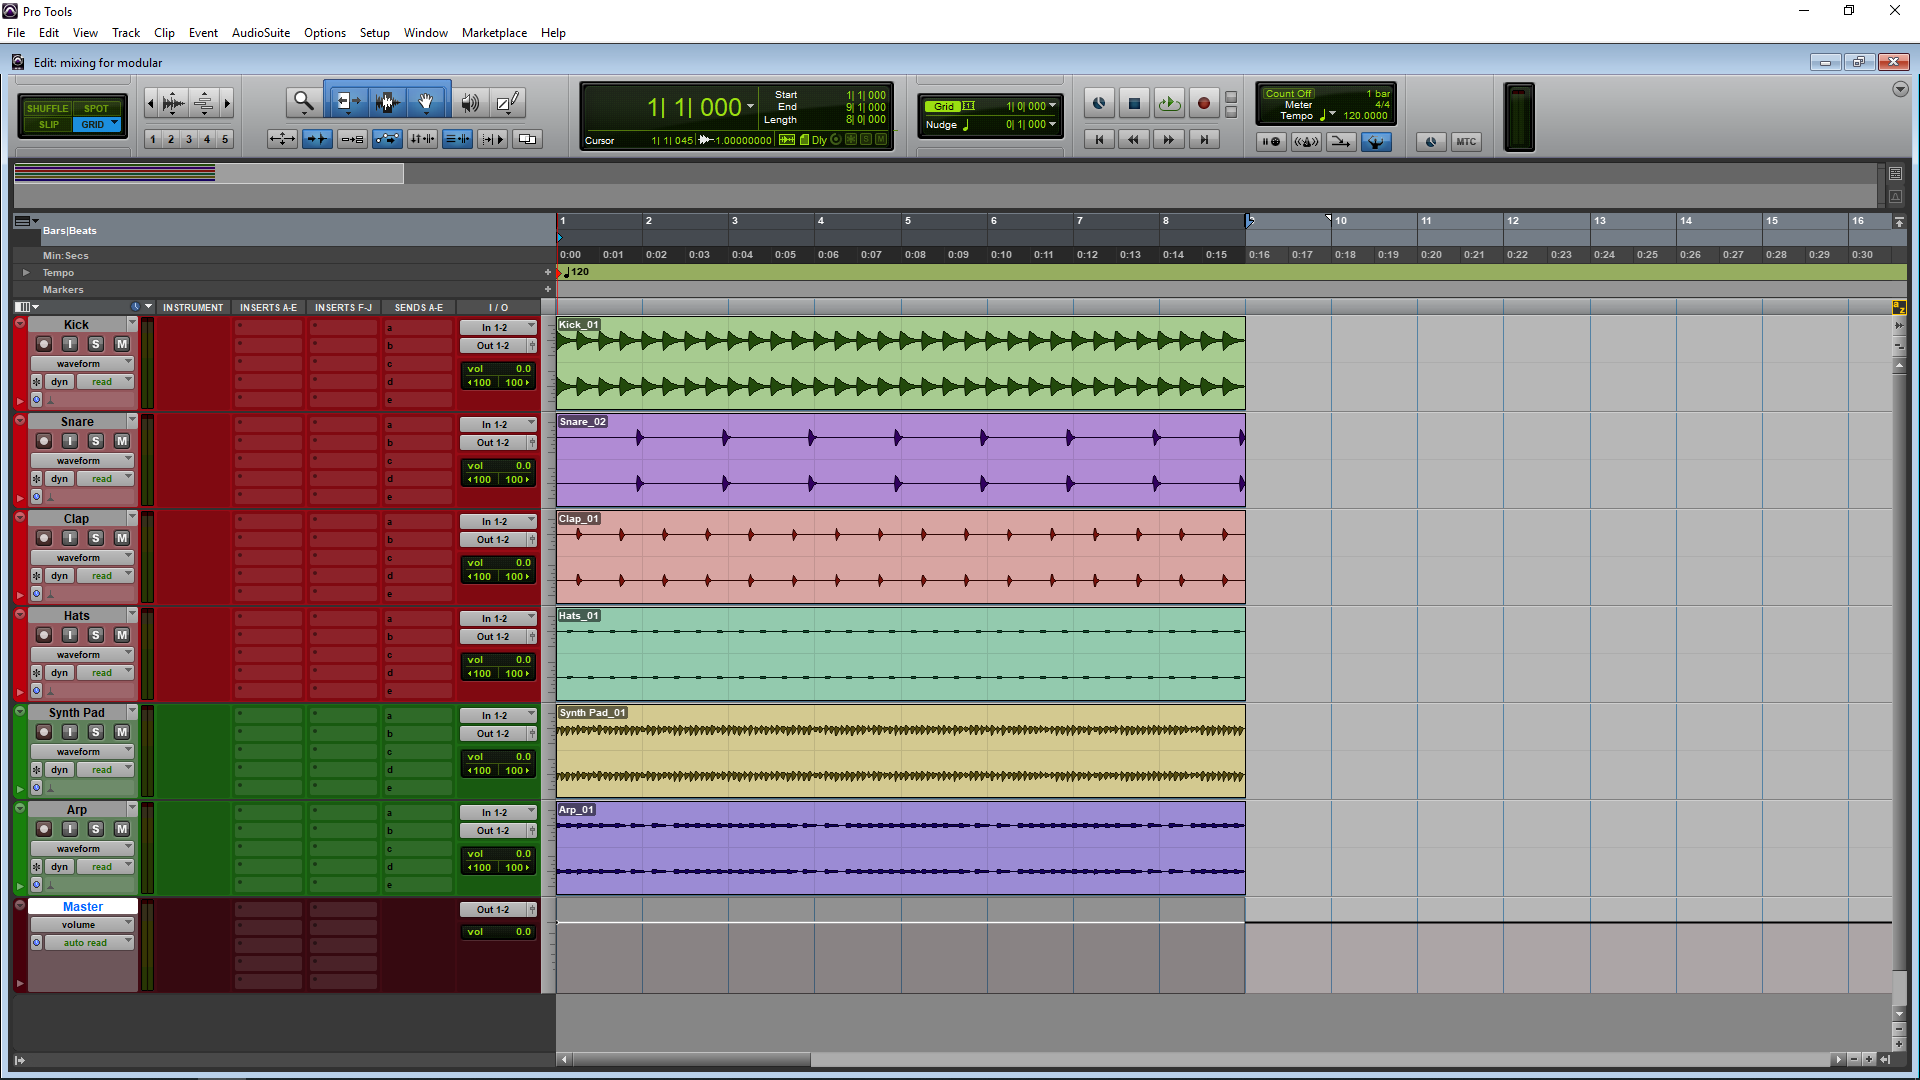 Image shows Pro Tools Mixing Screen